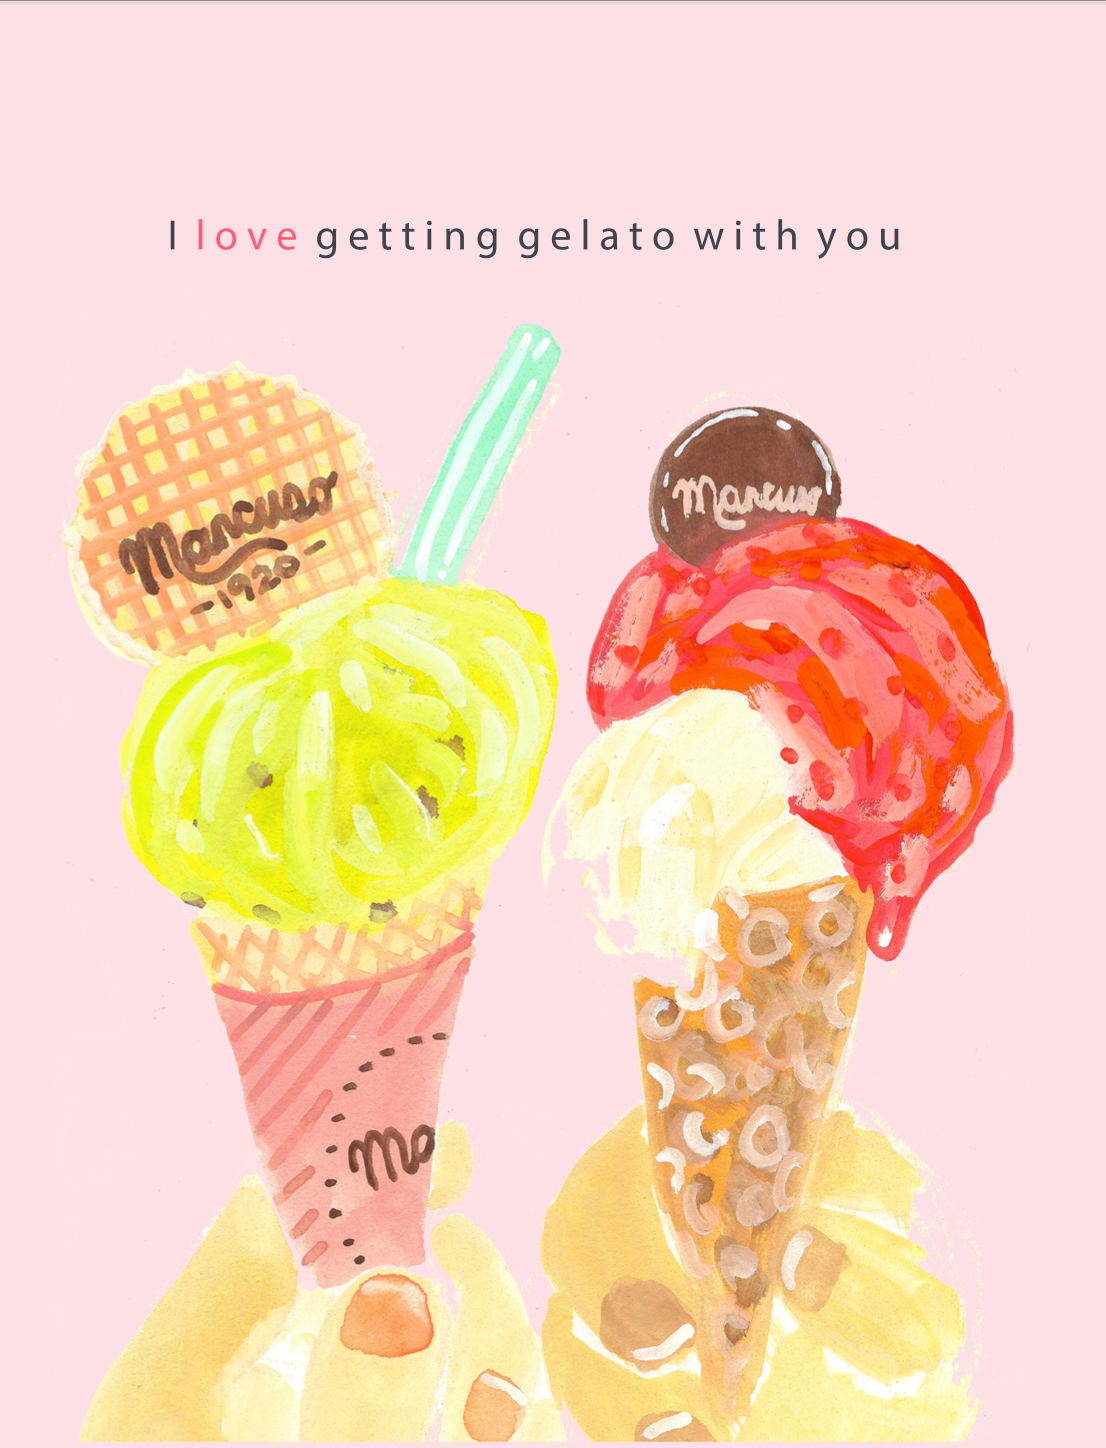 I love getting gelato with you’ Greeting Card